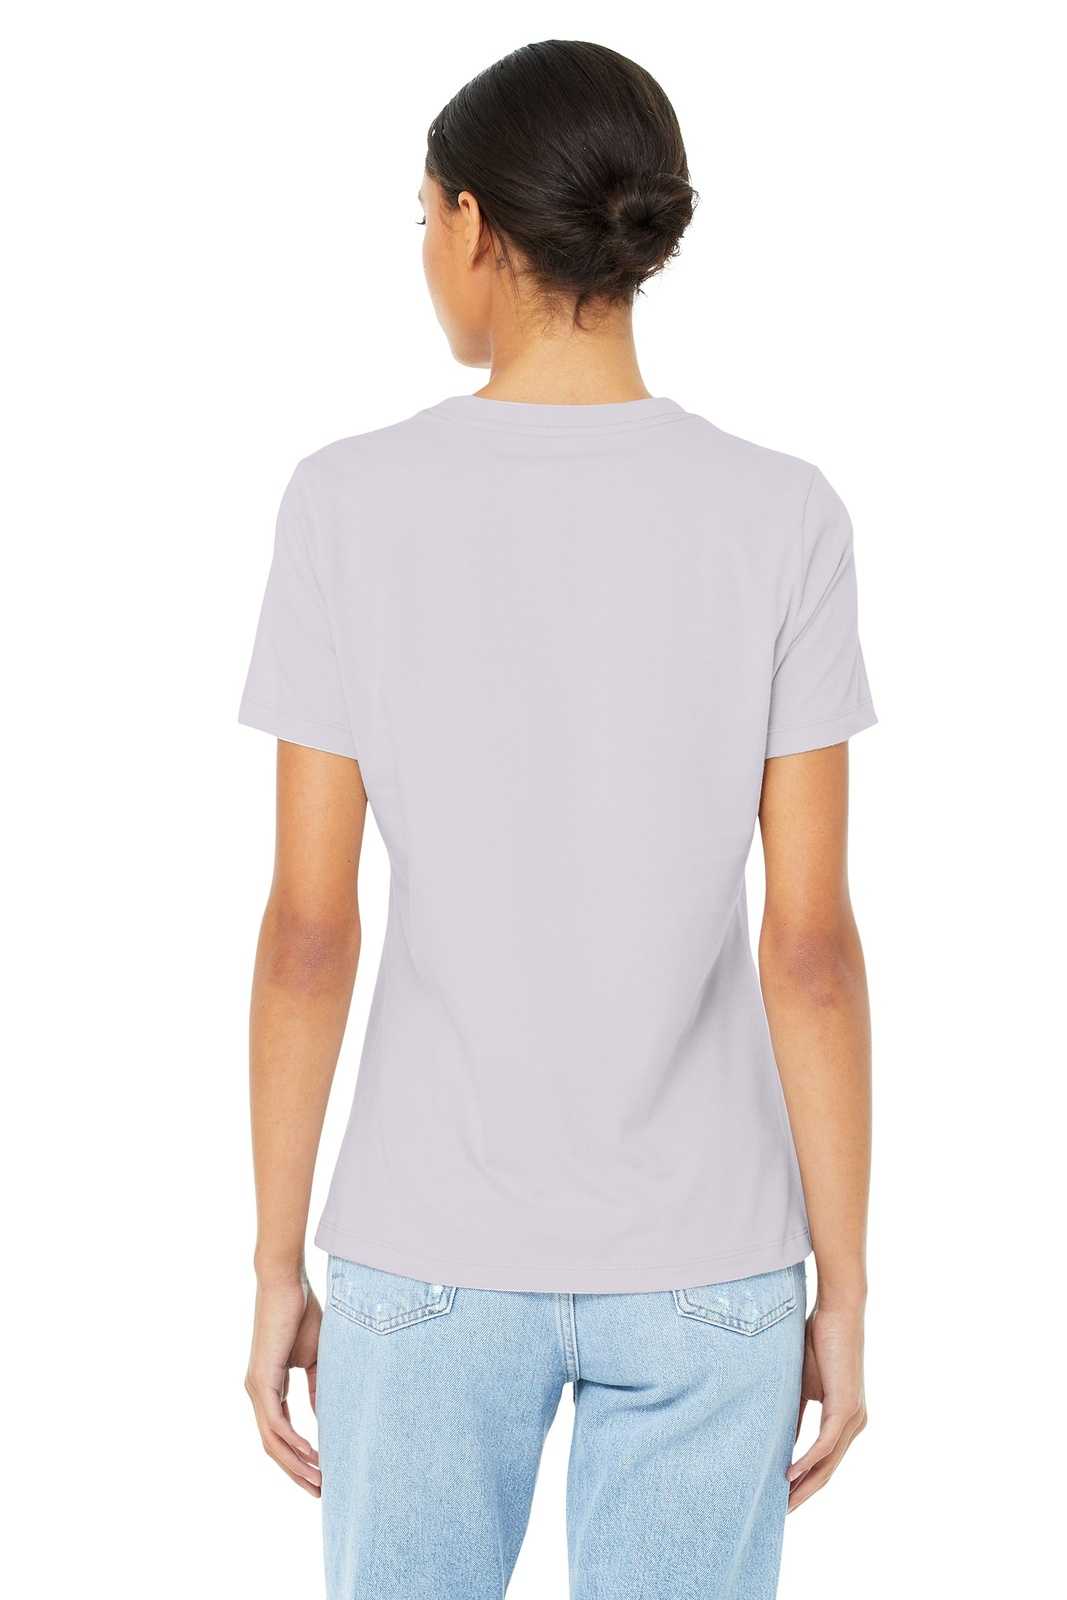 Bella + Canvas 6400 Womens Relaxed Jersey Tee - Lavender Dust - HIT a Double - 3